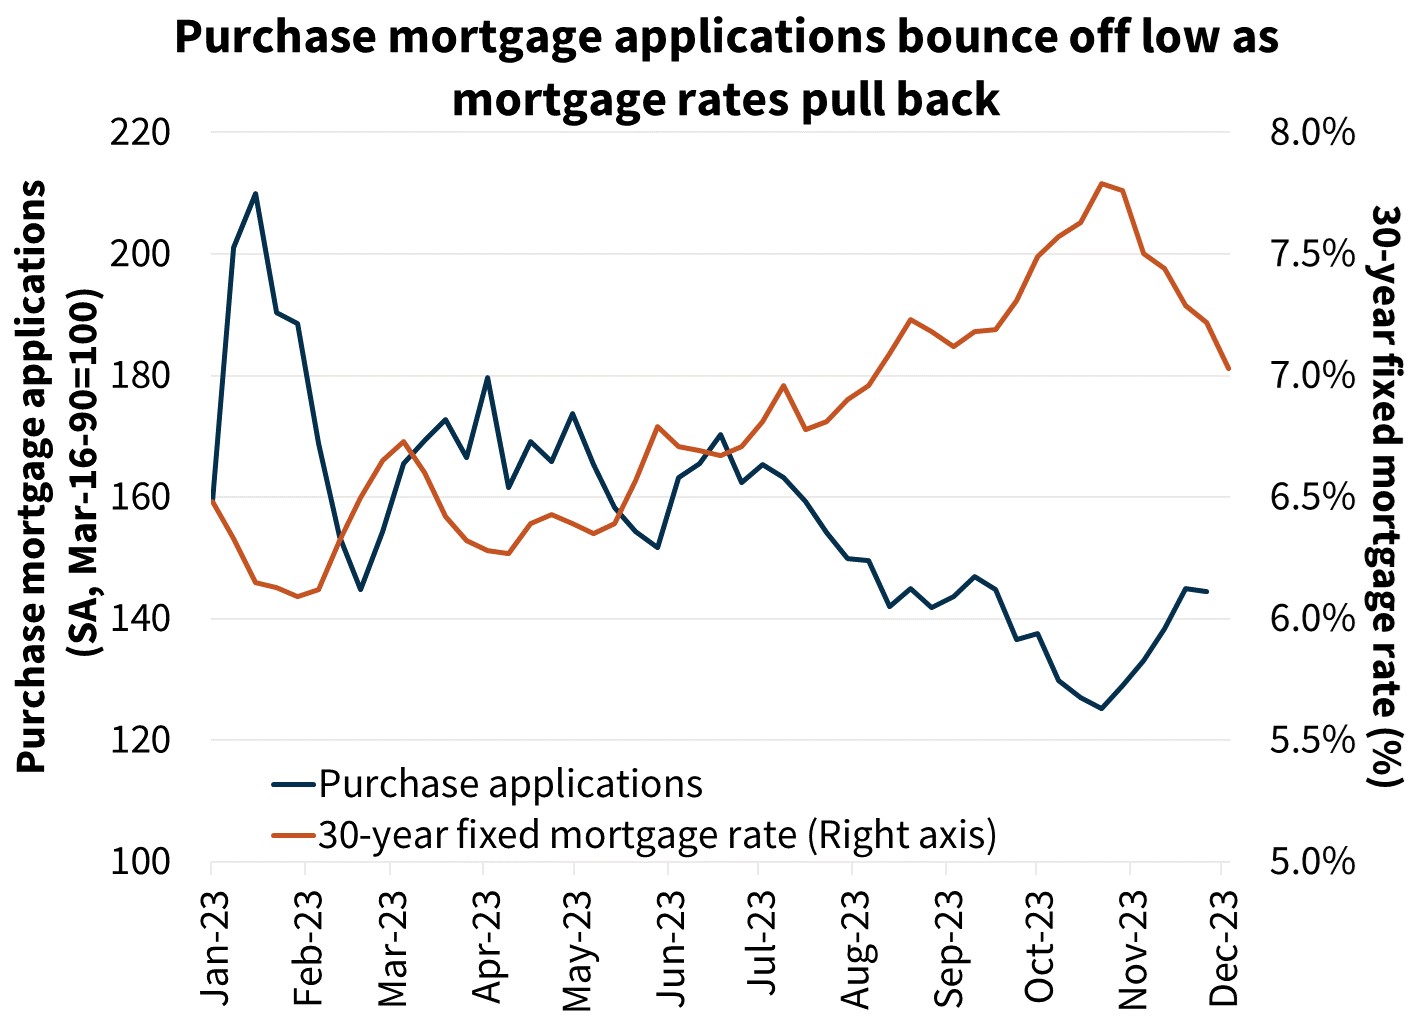 Purchase mortgage applications bounce off low as mortgage rates pull back